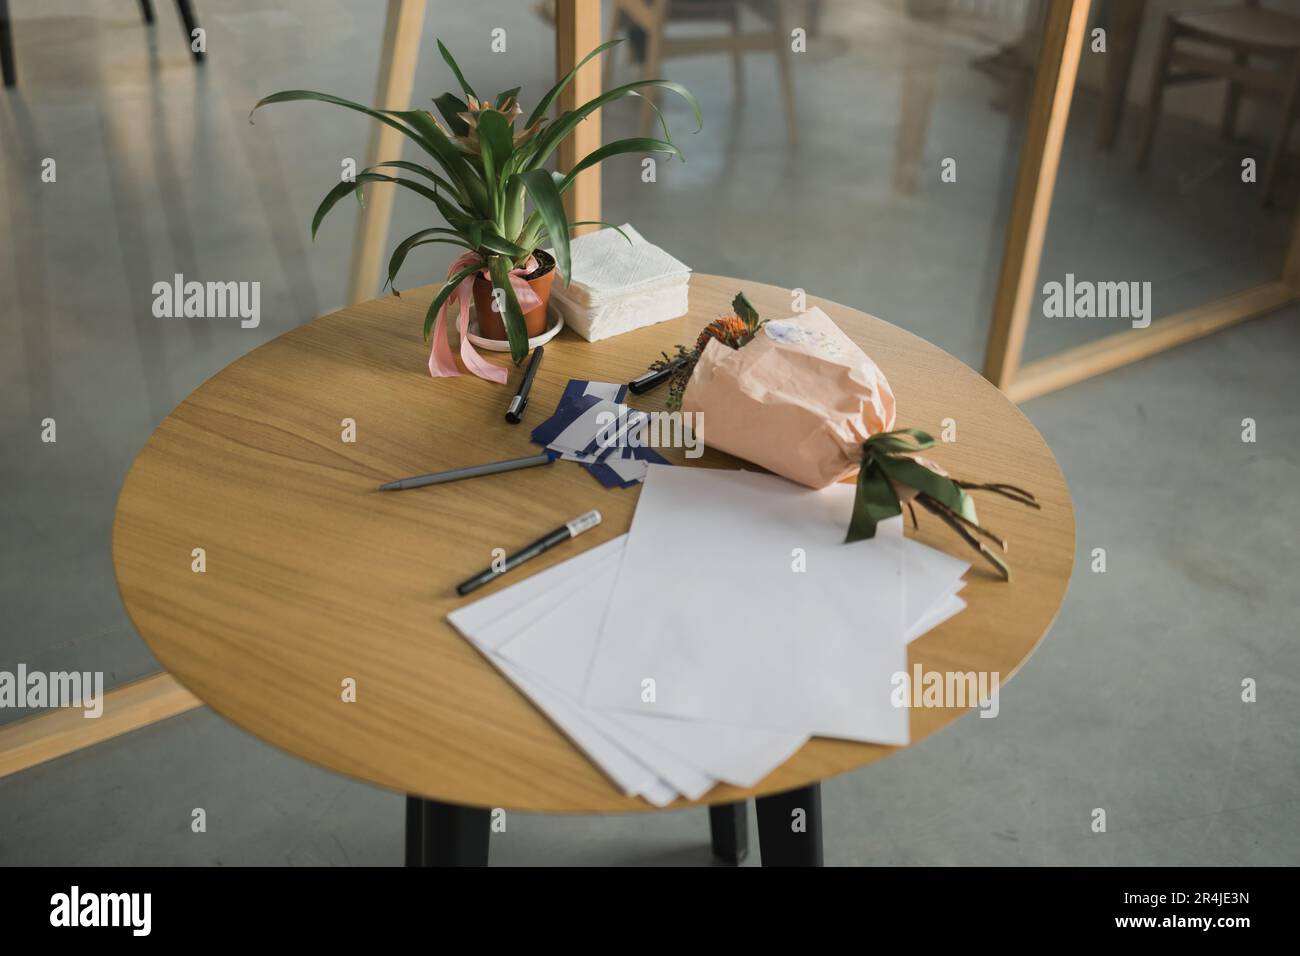 Table with business papers decorated with houseplants guzmania on desk. Exotic potted houseplants. Stock Photo